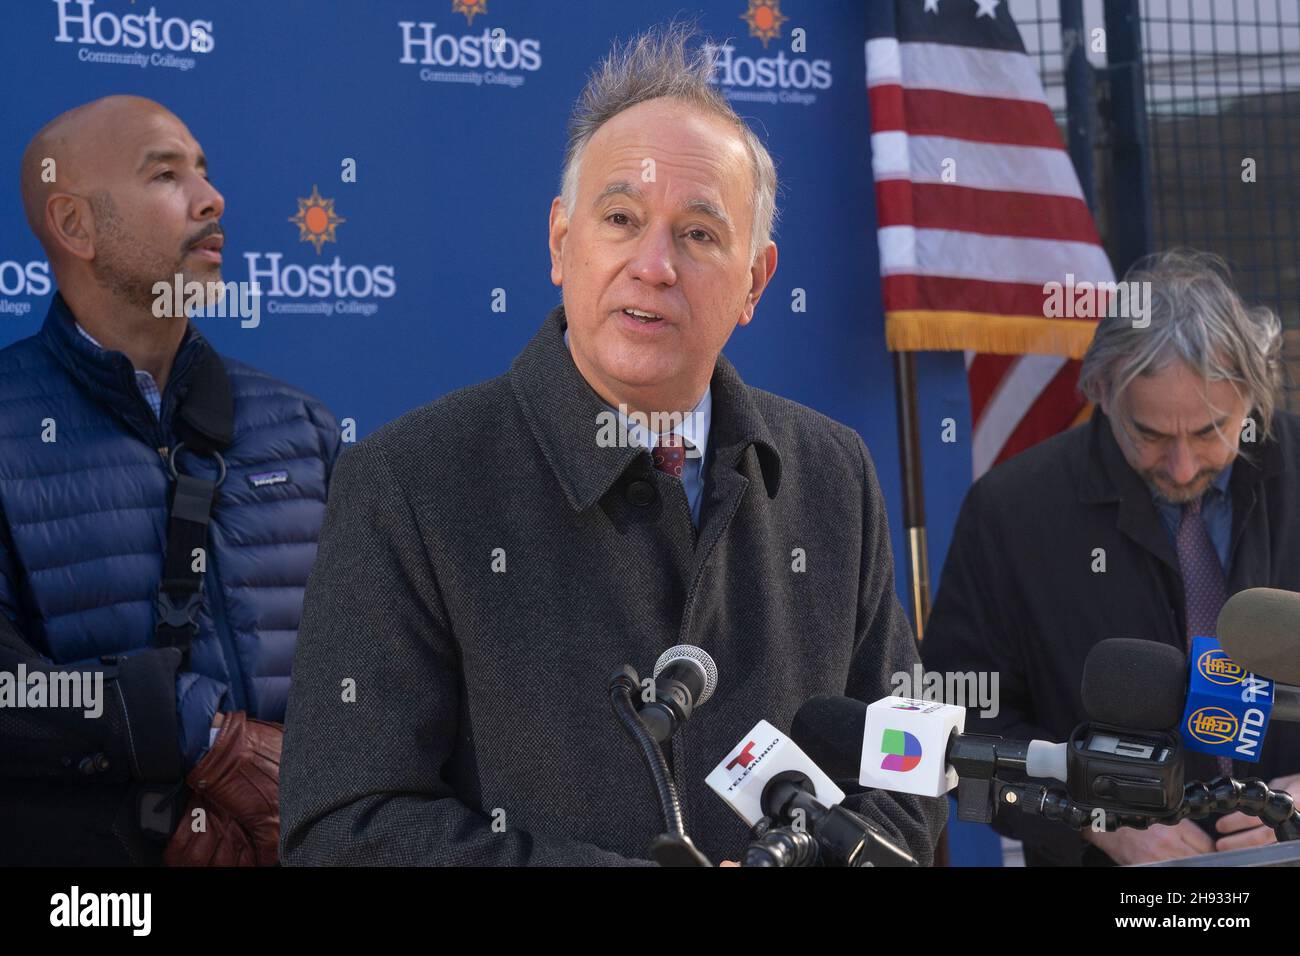 Felix Matos Rodriguez speaks during U.S. Senator Kirsten Gillibrand announcement of her legislation Enhance Access to SNAP in front of Hostos Community College in New York on December 3, 2021. Legislation would expand Supplemental Nutrition Assistance Program (SNAP) benefit eligibility to all college students attending 2 and 4-year universities part-time or more who meet traditional SNAP income and other eligibility requirements. Senator was joined by CUNY Chancellor Felix Matos Rodriguez, Bronx Borough President Ruben Diaz Jr., Assembly Member Amanda Septimo, Hostos Community College Presiden Stock Photo